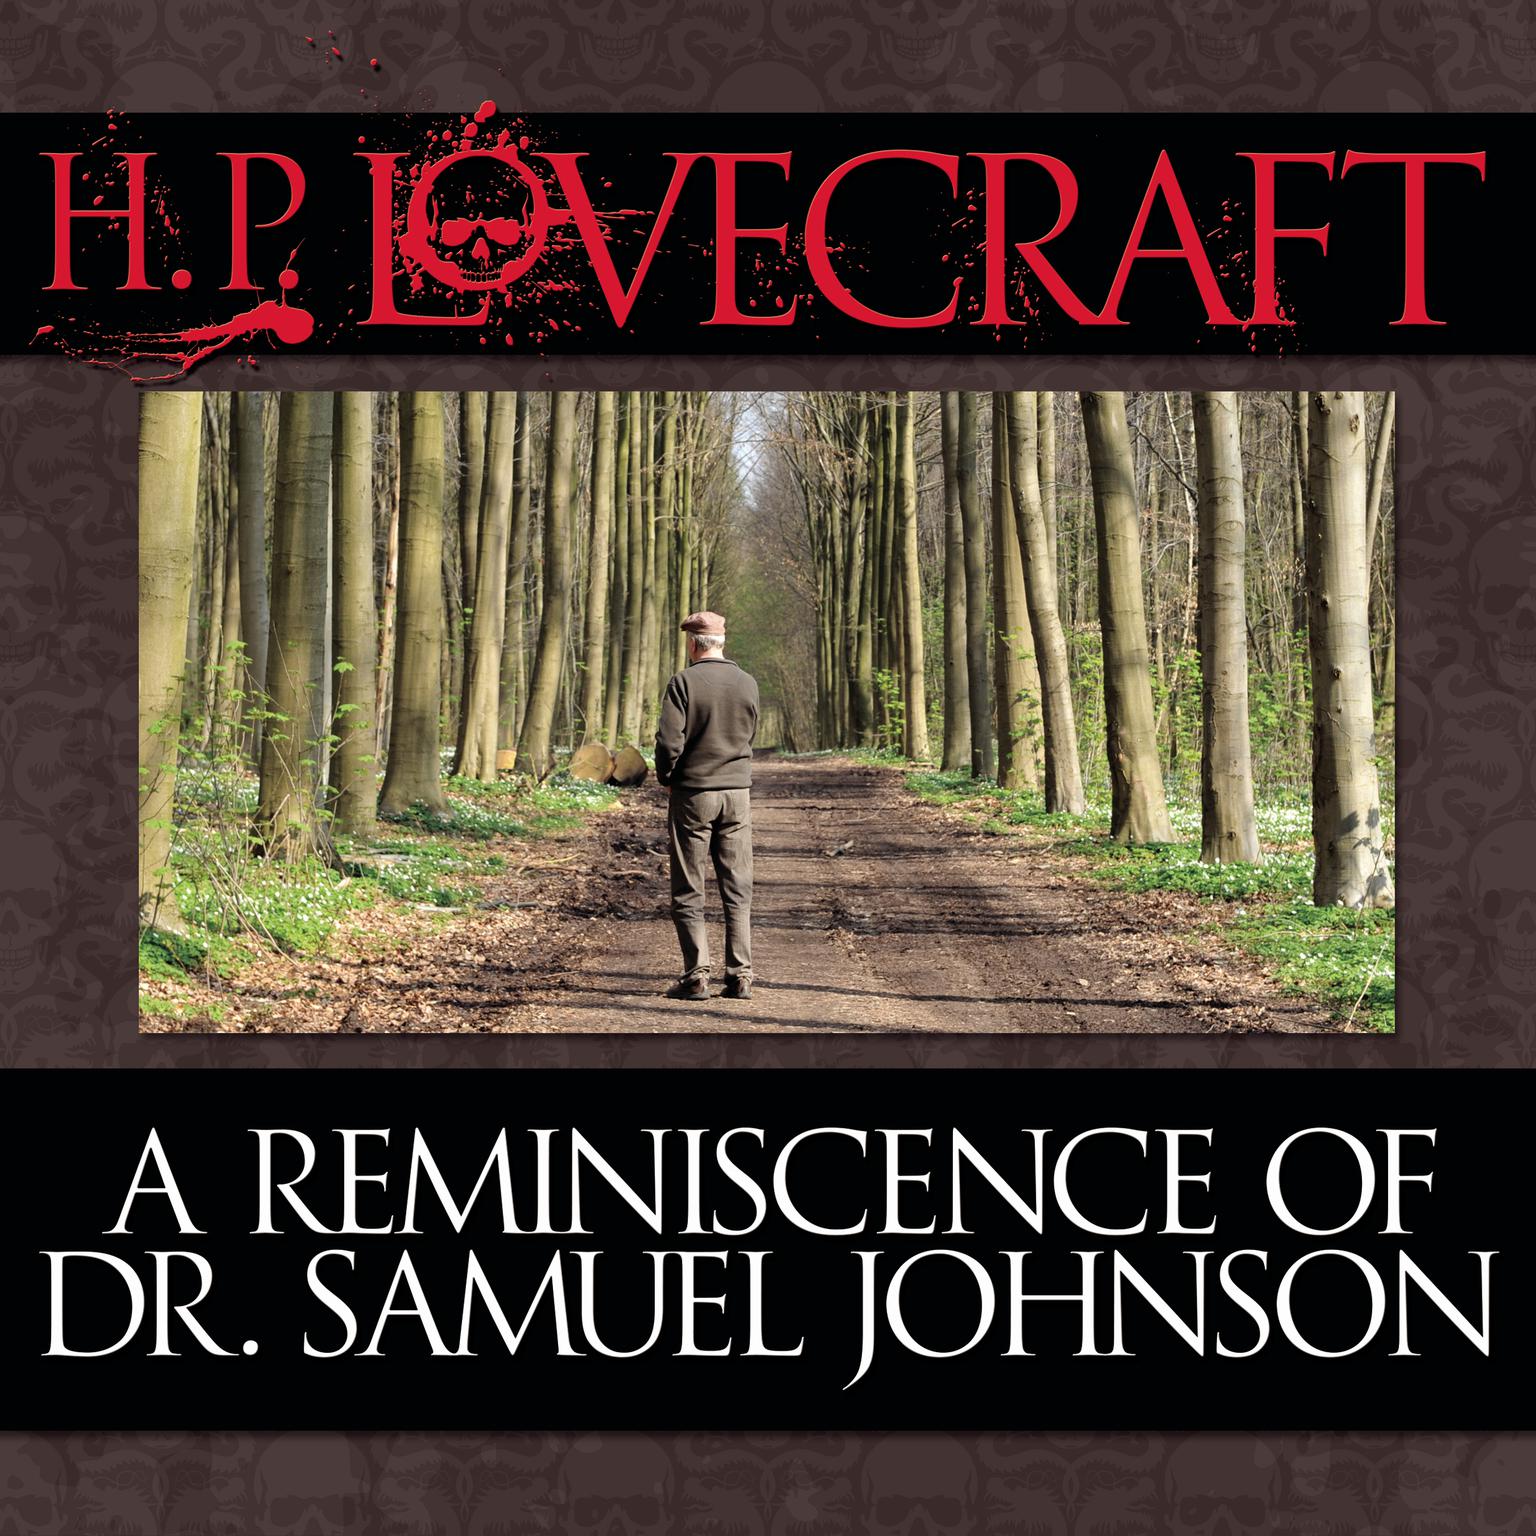 A Reminiscence Dr. Samuel Johnson Audiobook, by H. P. Lovecraft